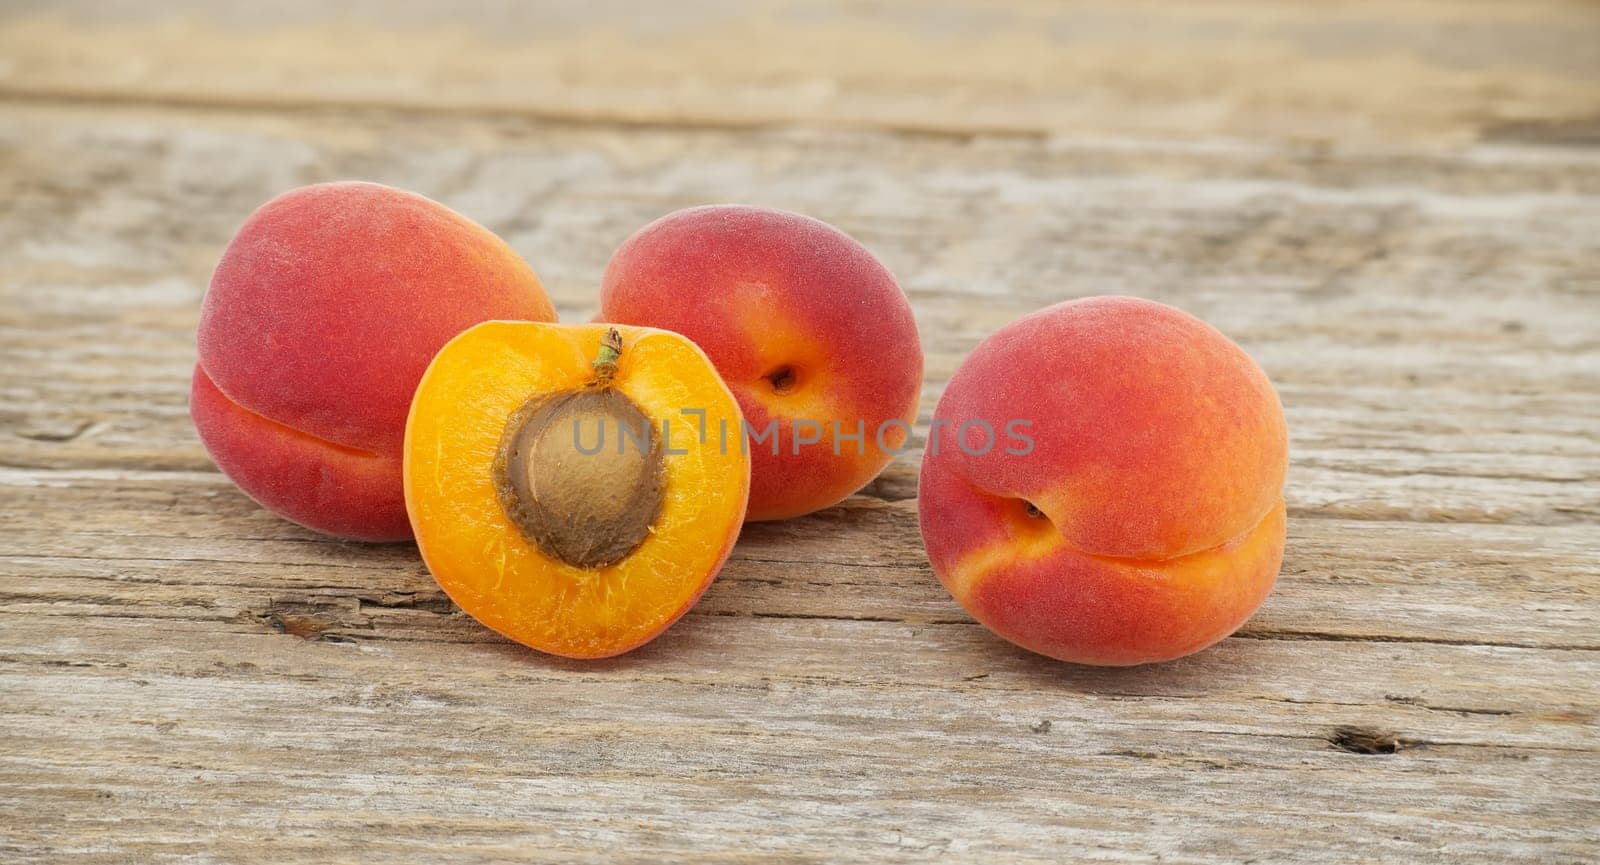 Group of fresh whole apricots and one cut in half to reveal its interior, rustic wooden table